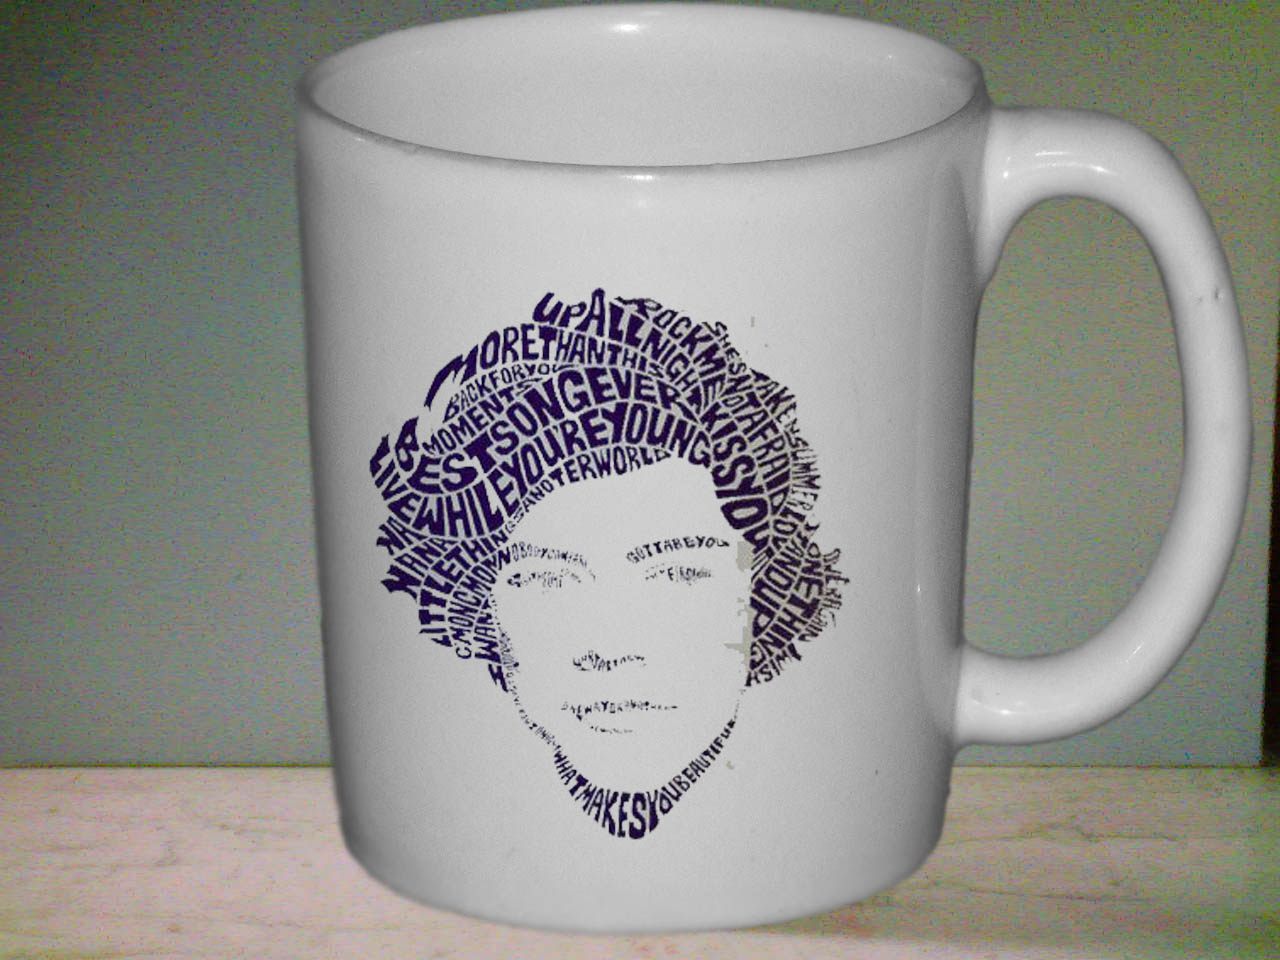 https://www.teesfashionstyle.com/wp-content/uploads/2016/08/Harry-Styles-Typographic-one-direction-For-Ceramic-Mug-Design.jpg